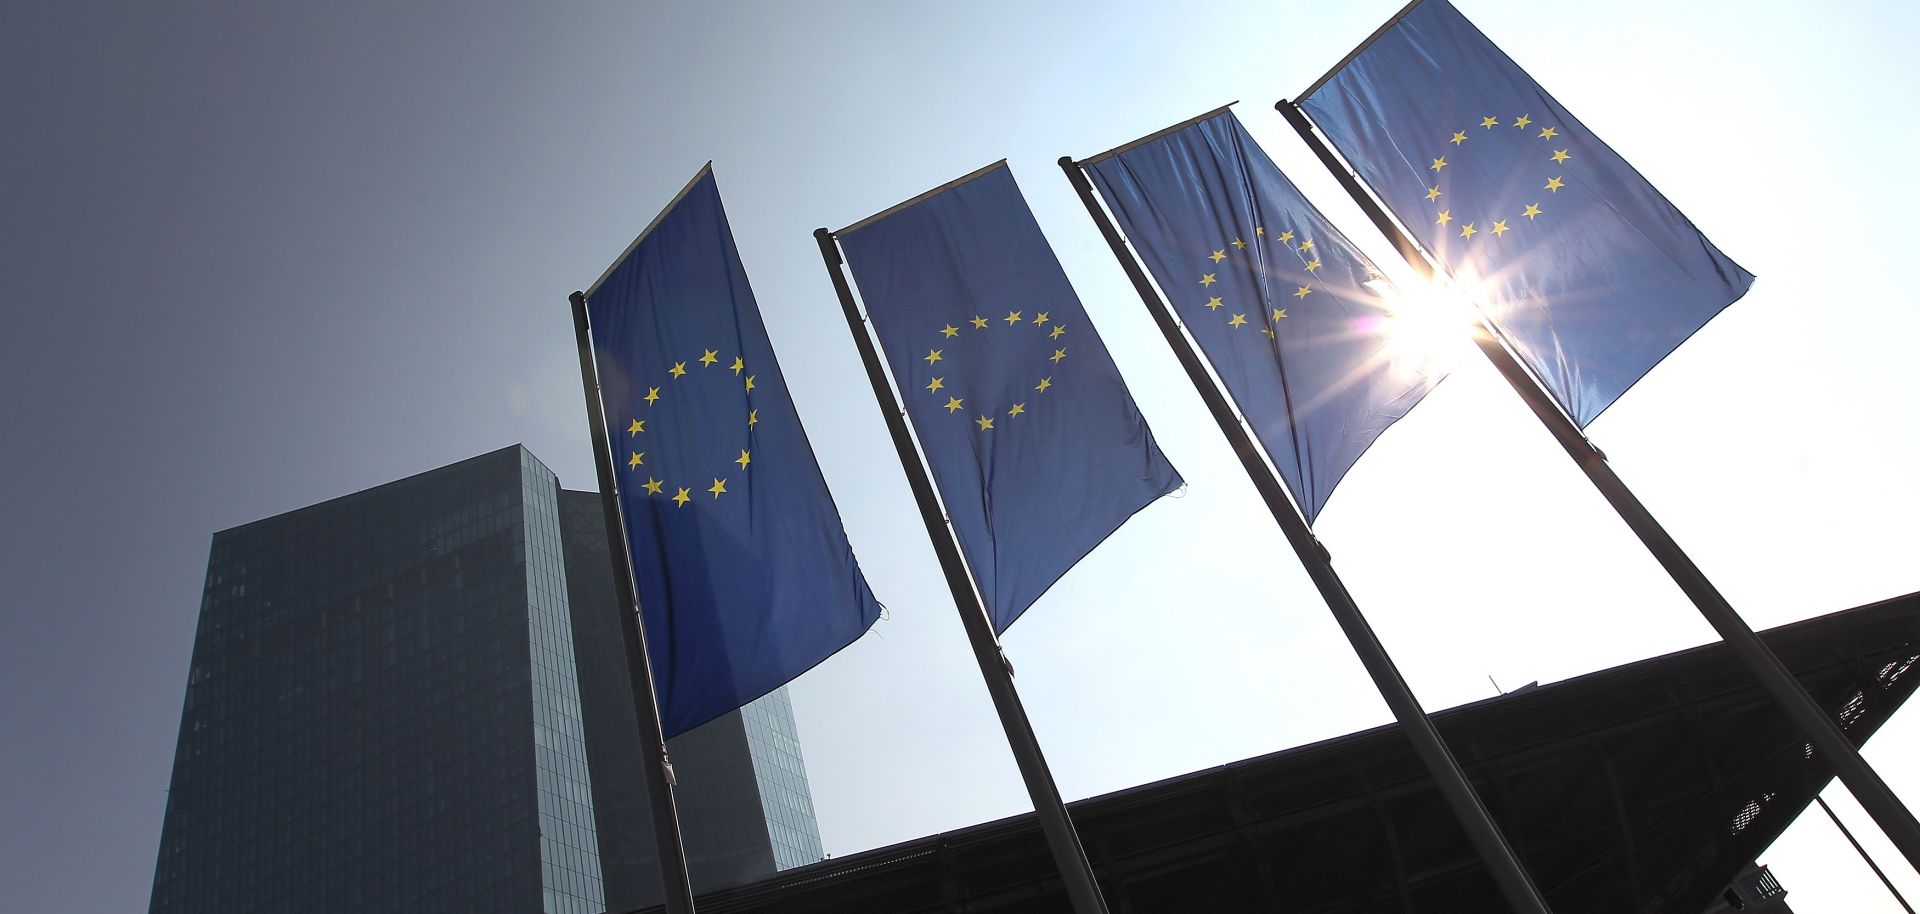 Banners of the European Union fly outside the European Central Bank headquarters in Frankfurt, Germany.